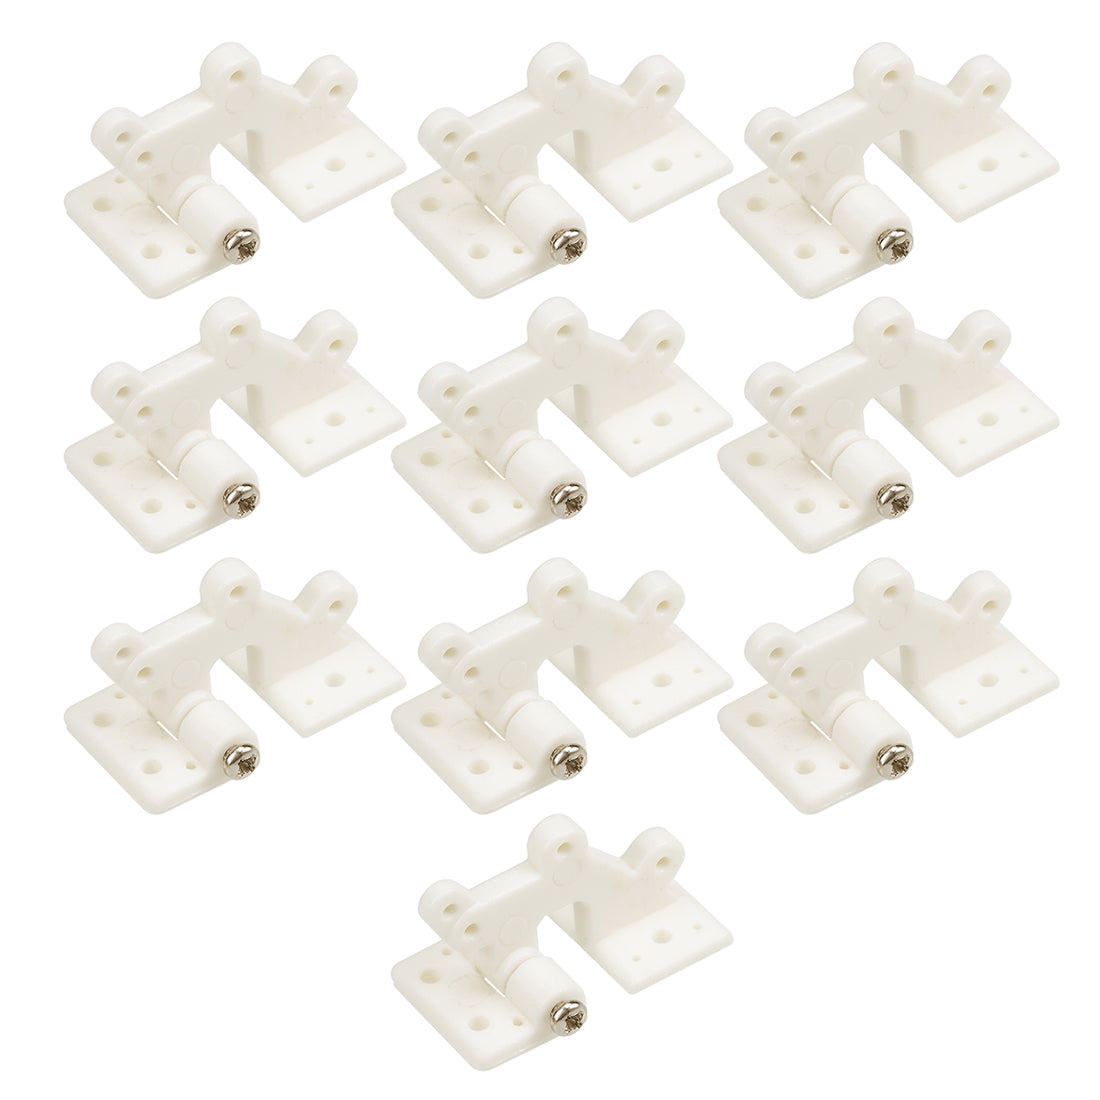 uxcell Uxcell RC Hinges Adjustable Hatch Hinge L30 x W16 mm, for RC Model Airplane Parts White 10pcs